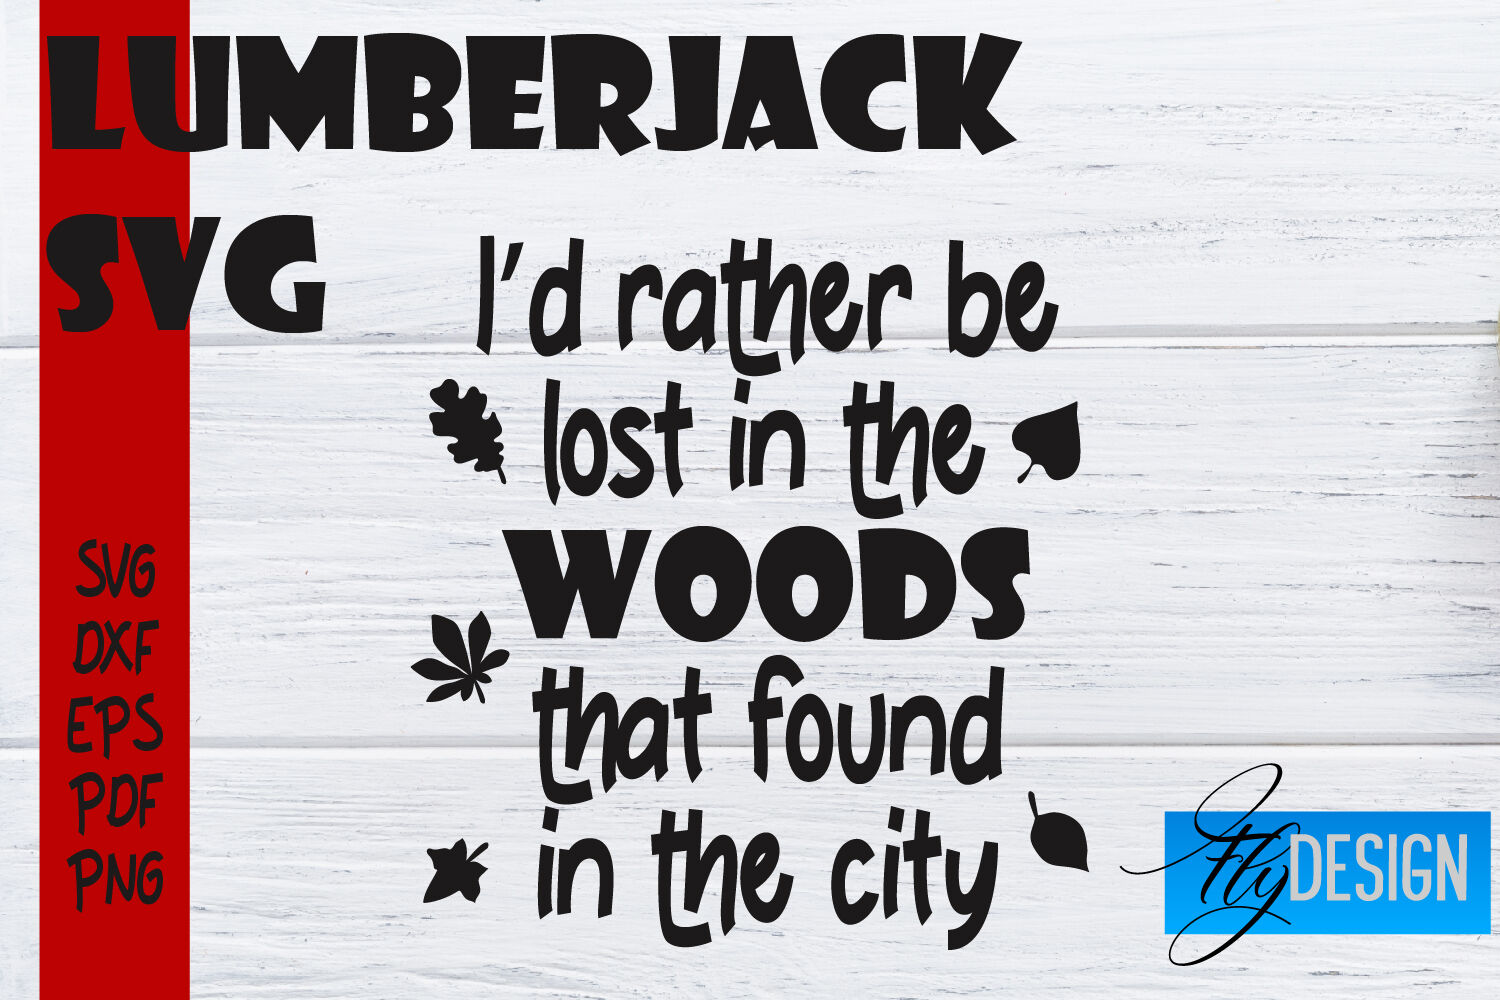 Lumberjack SVG | Funny Quotes SVG By Fly Design | TheHungryJPEG